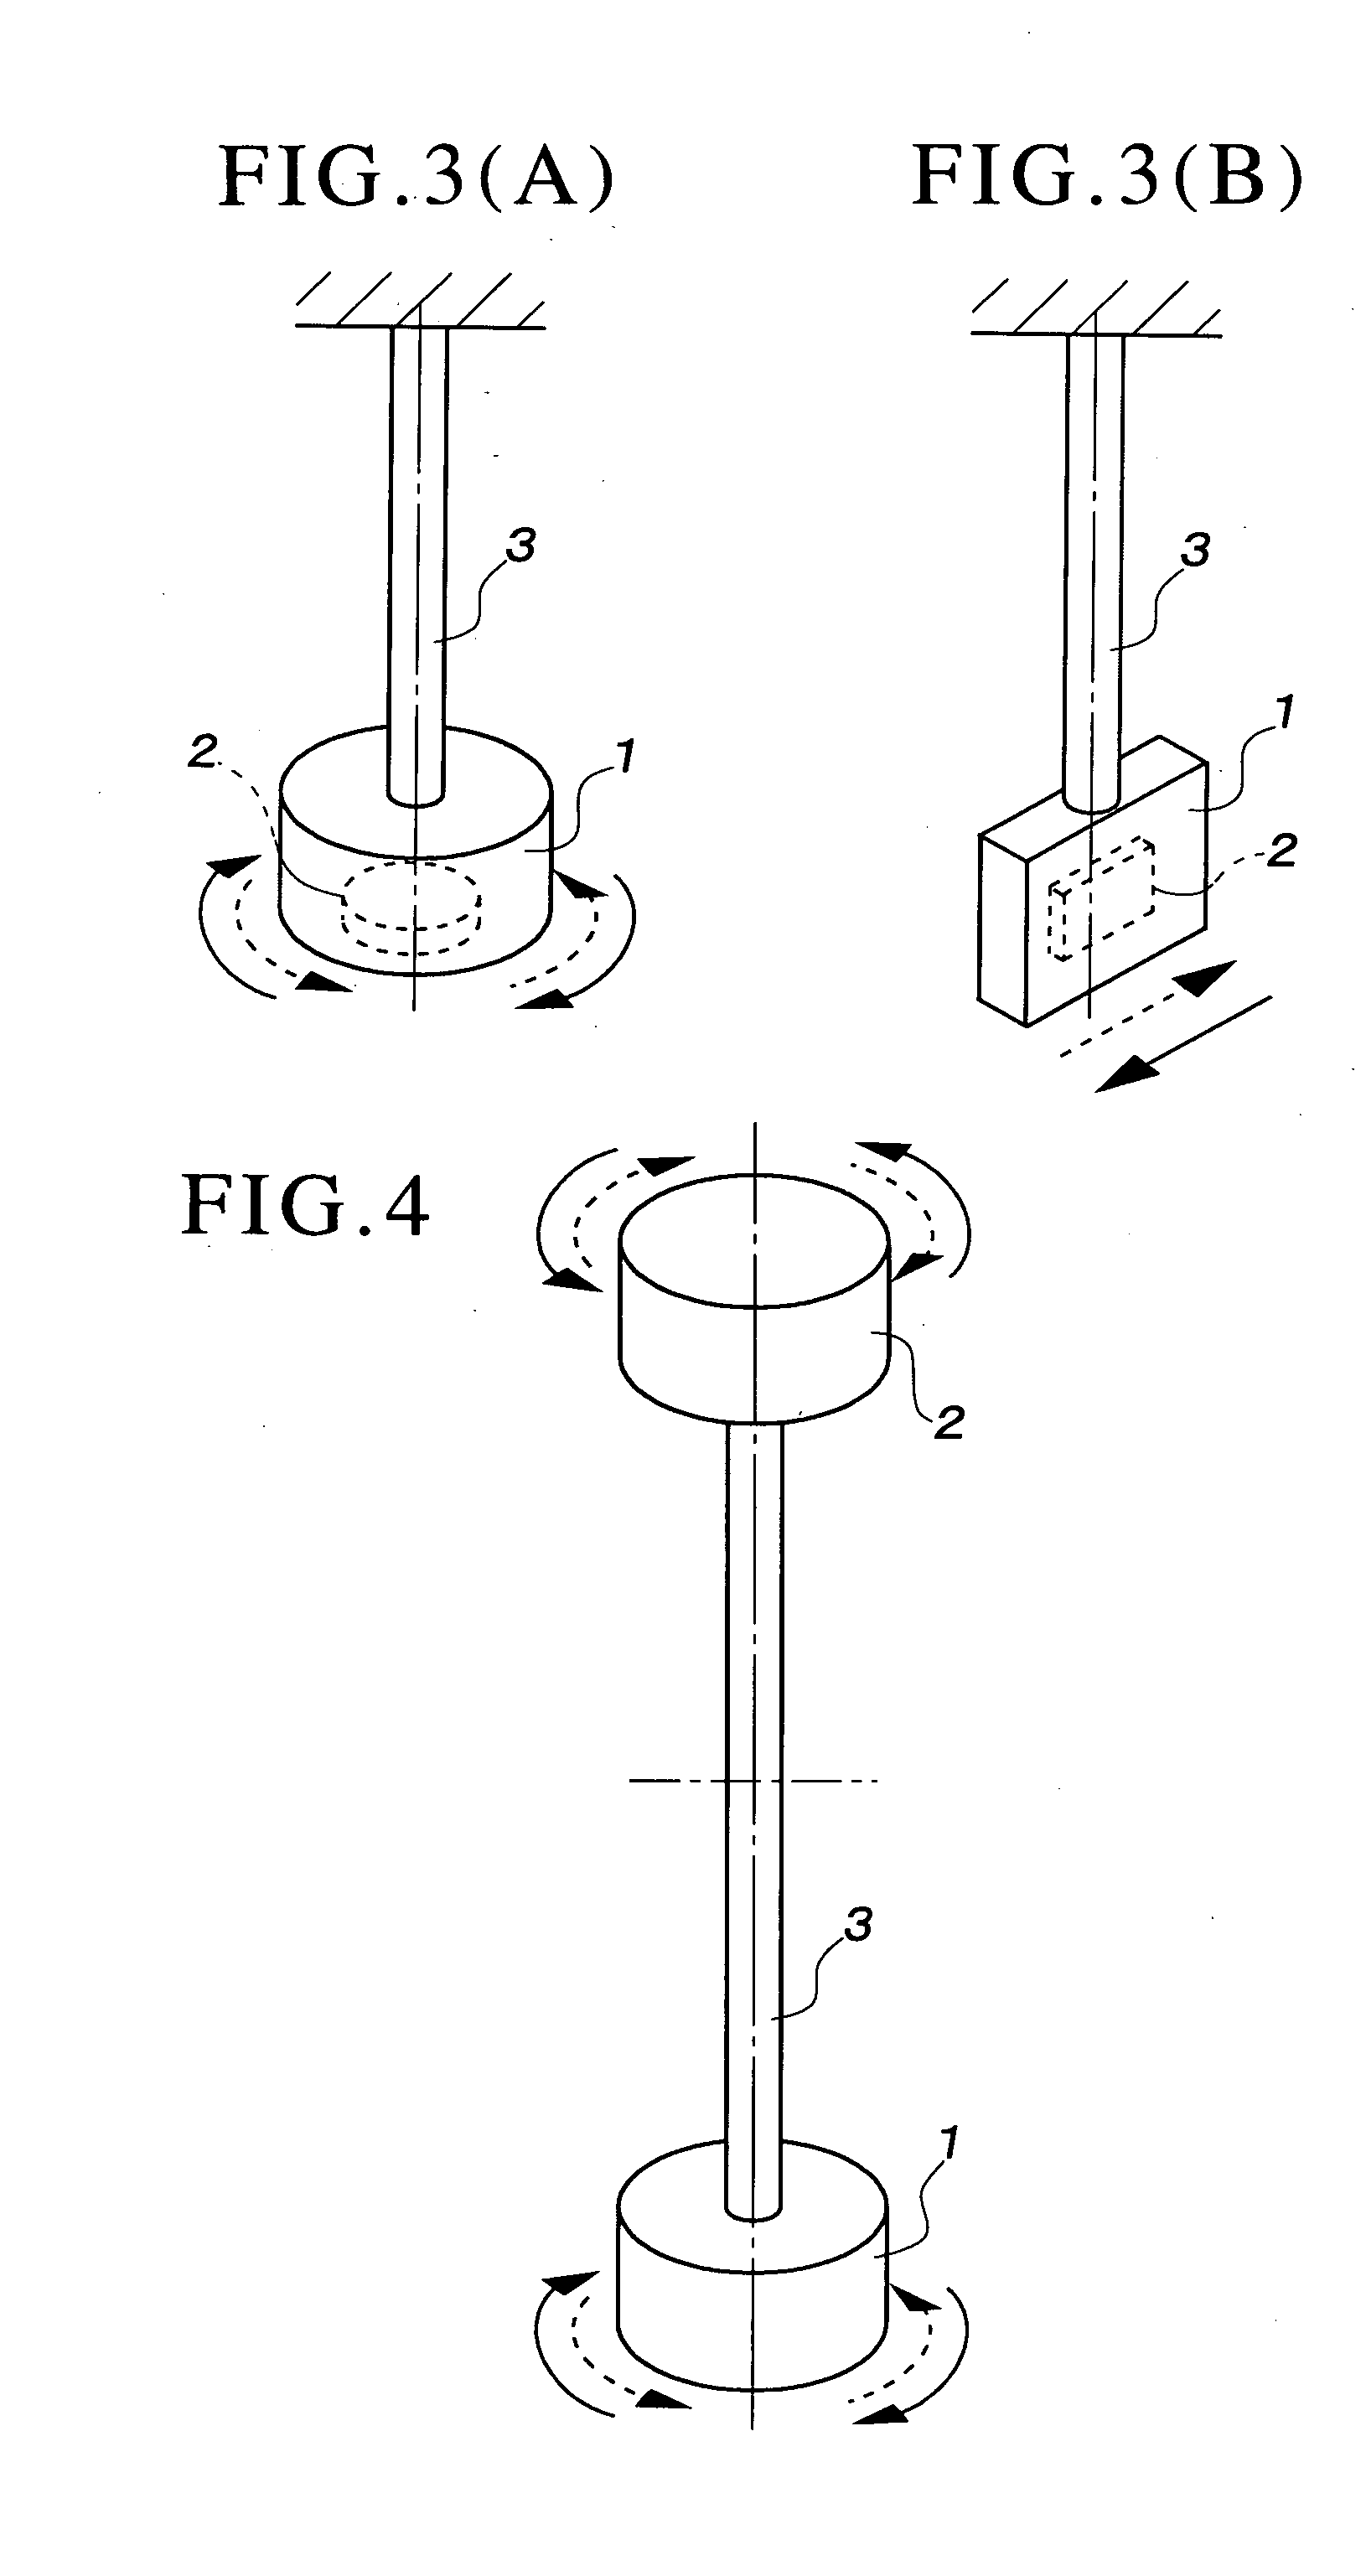 Method for measuring viscosity and/or elasticity of liquid